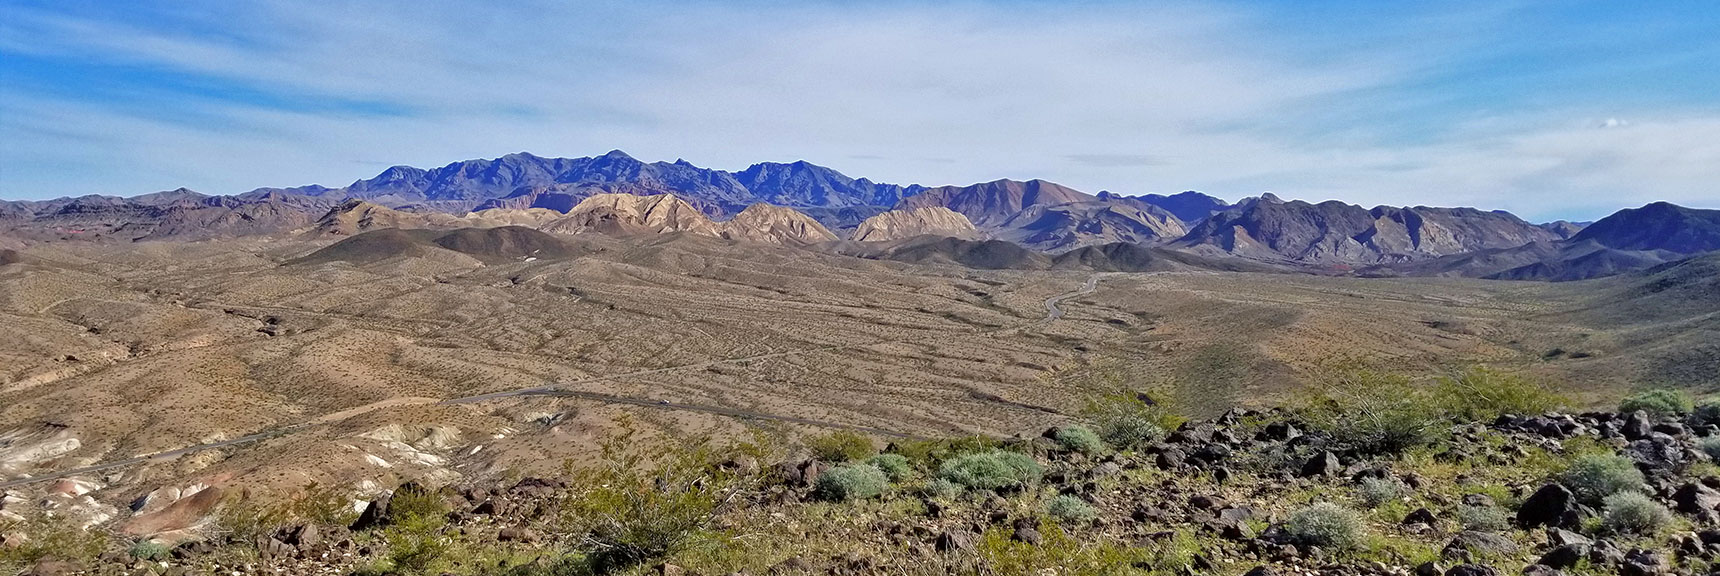 View North Toward Muddy Mountains from Black Mesa in Lake Mead National Recreation Area, Nevada